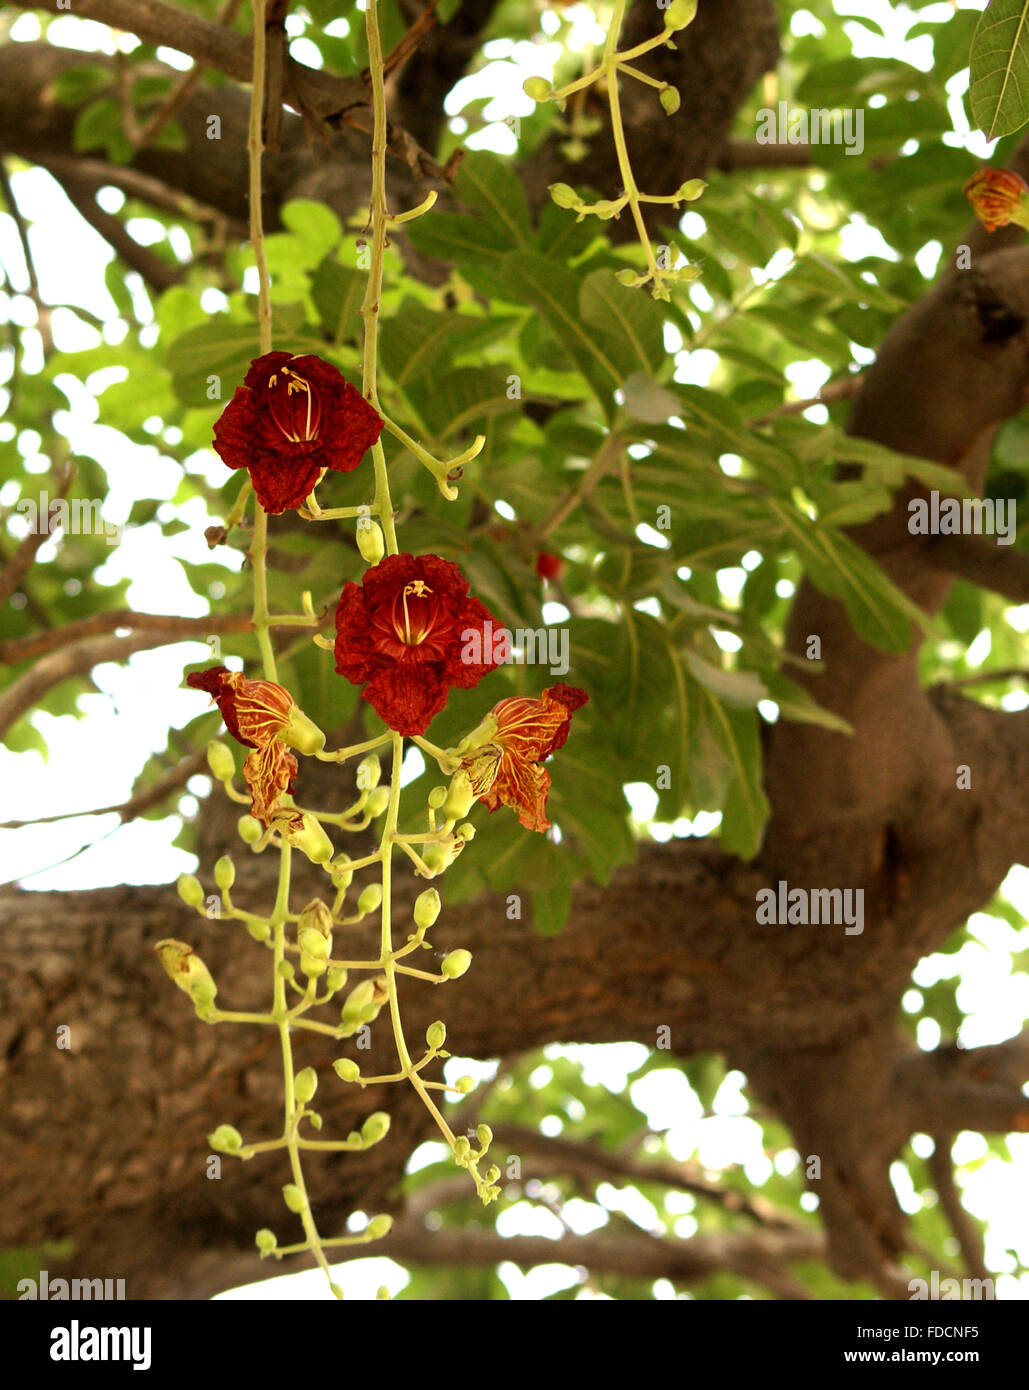 Kigelia africana, Sausage tree, large evergreen tree with pinnate compound leaves and brick red flowers in hanging racemes Stock Photo